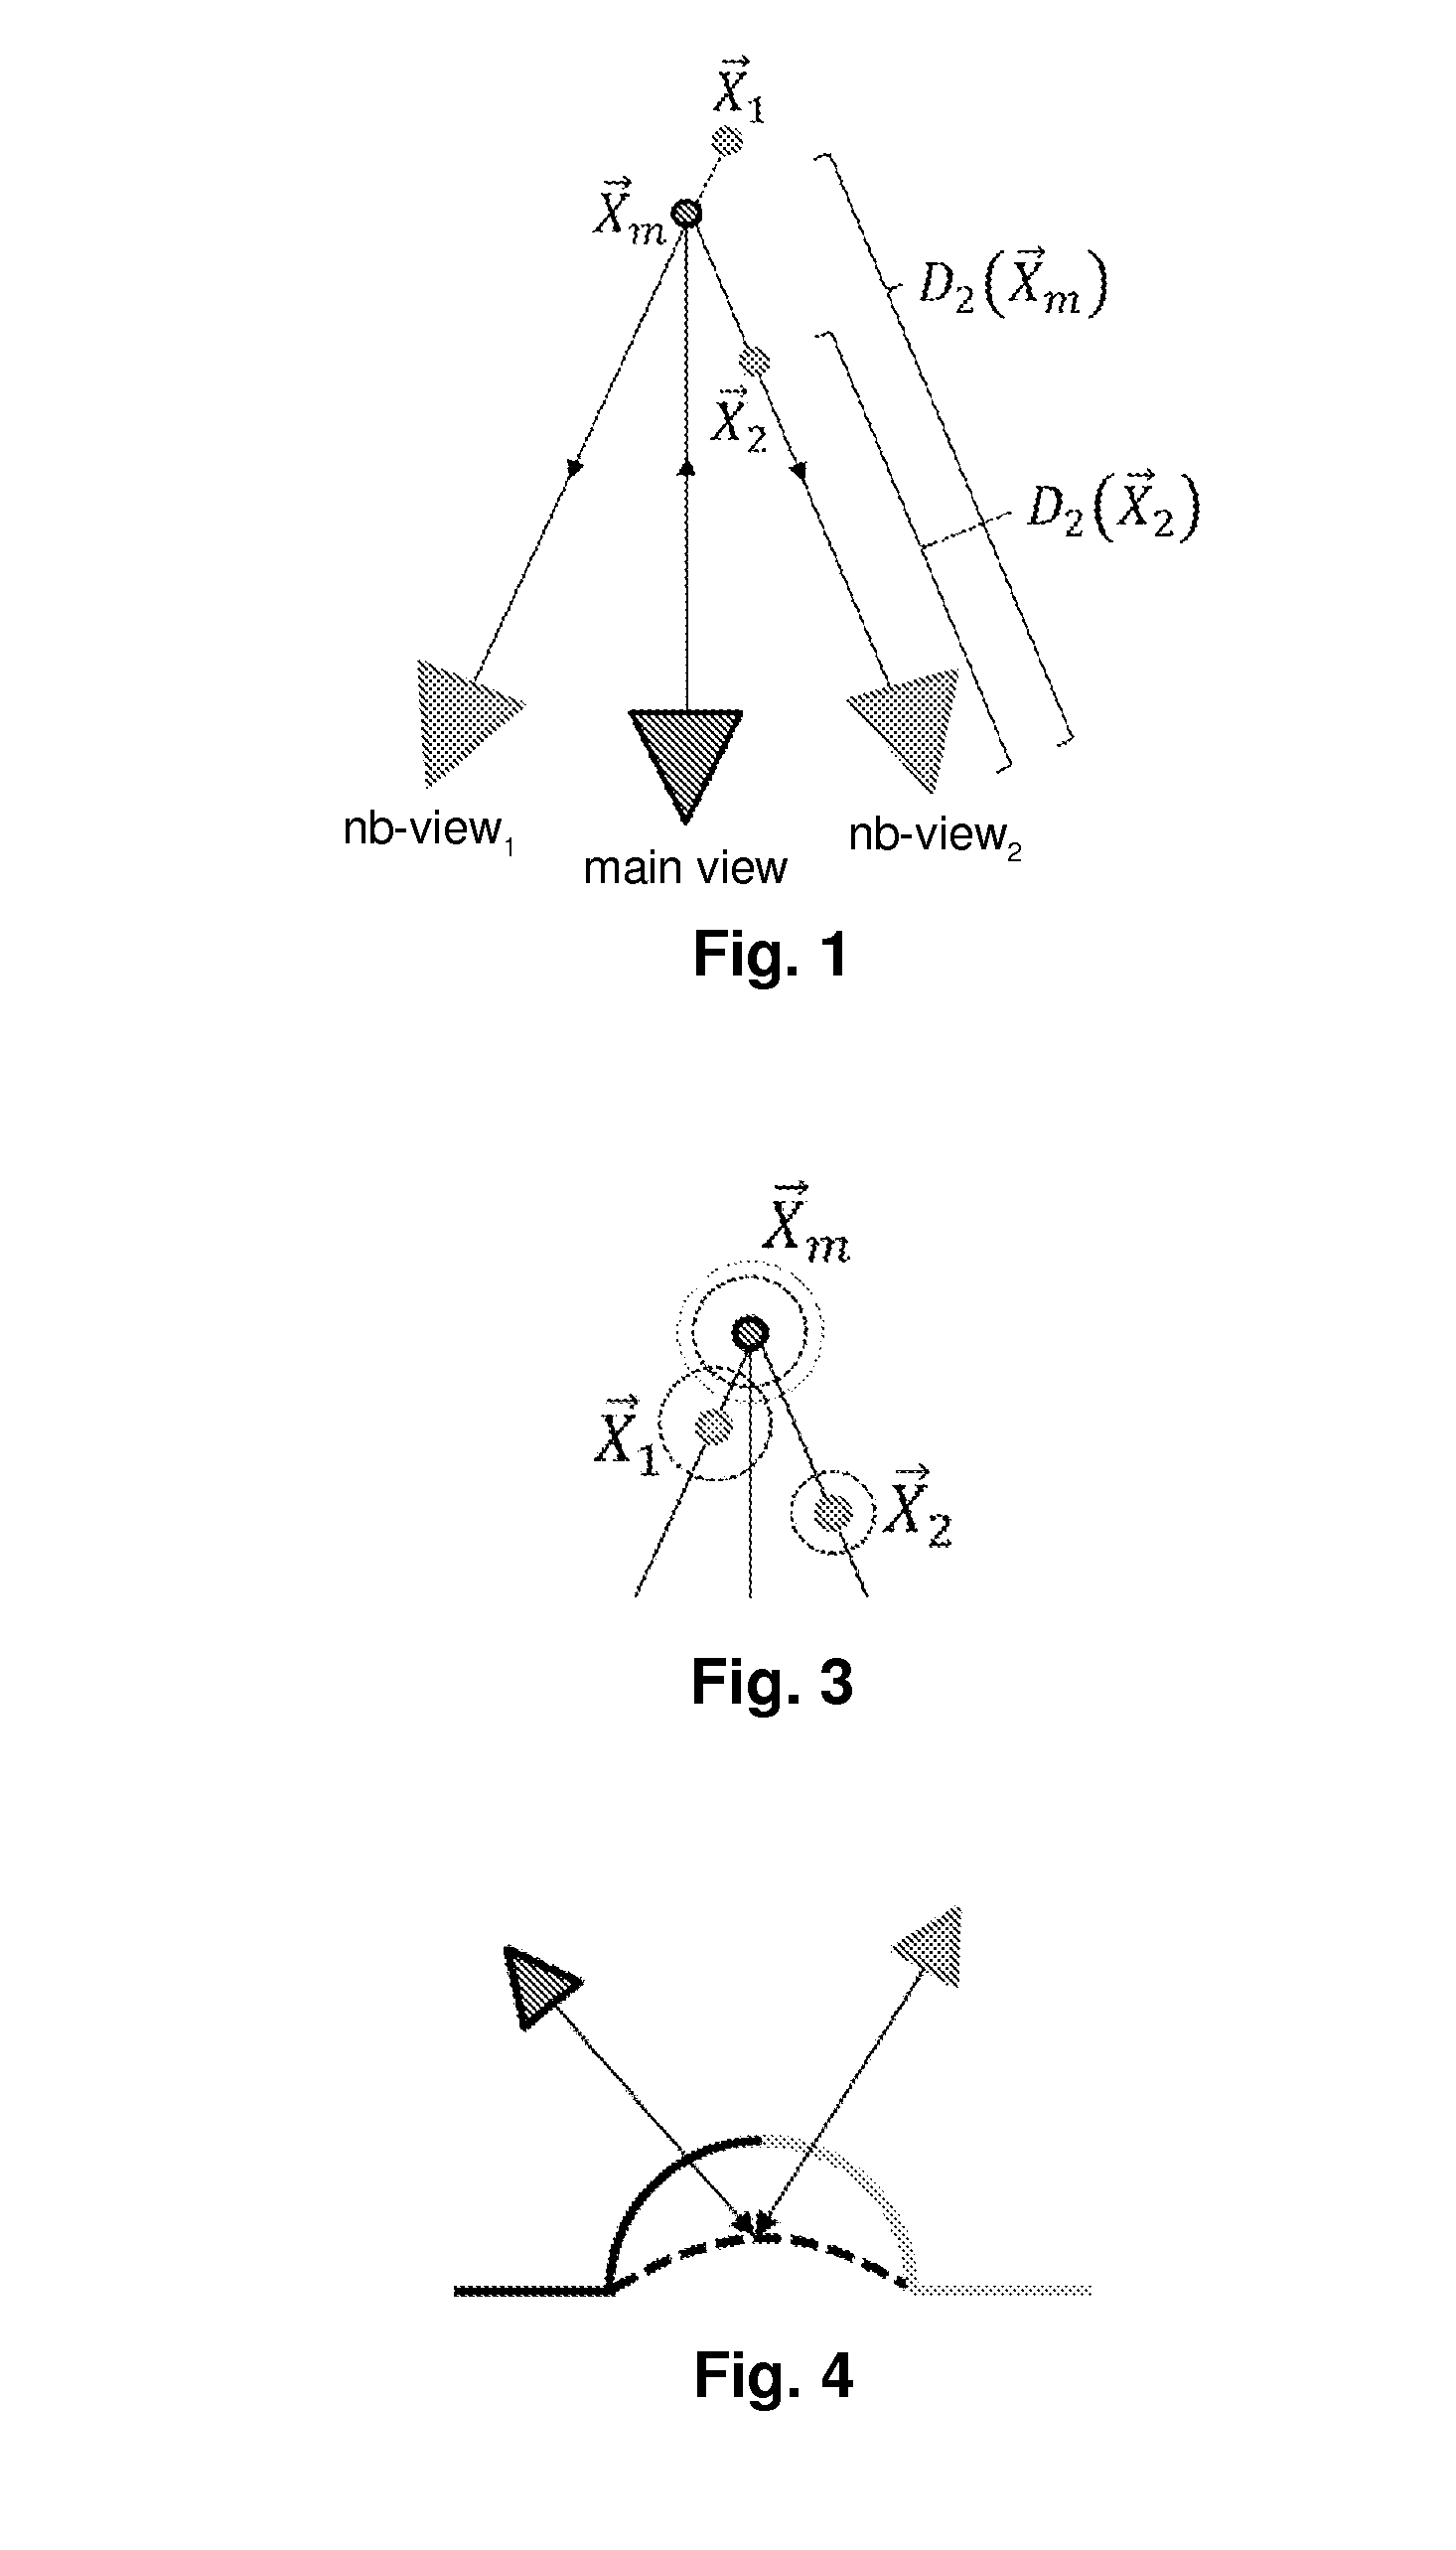 Method and apparatus for removing outliers from a main view of a scene during 3D scene reconstruction